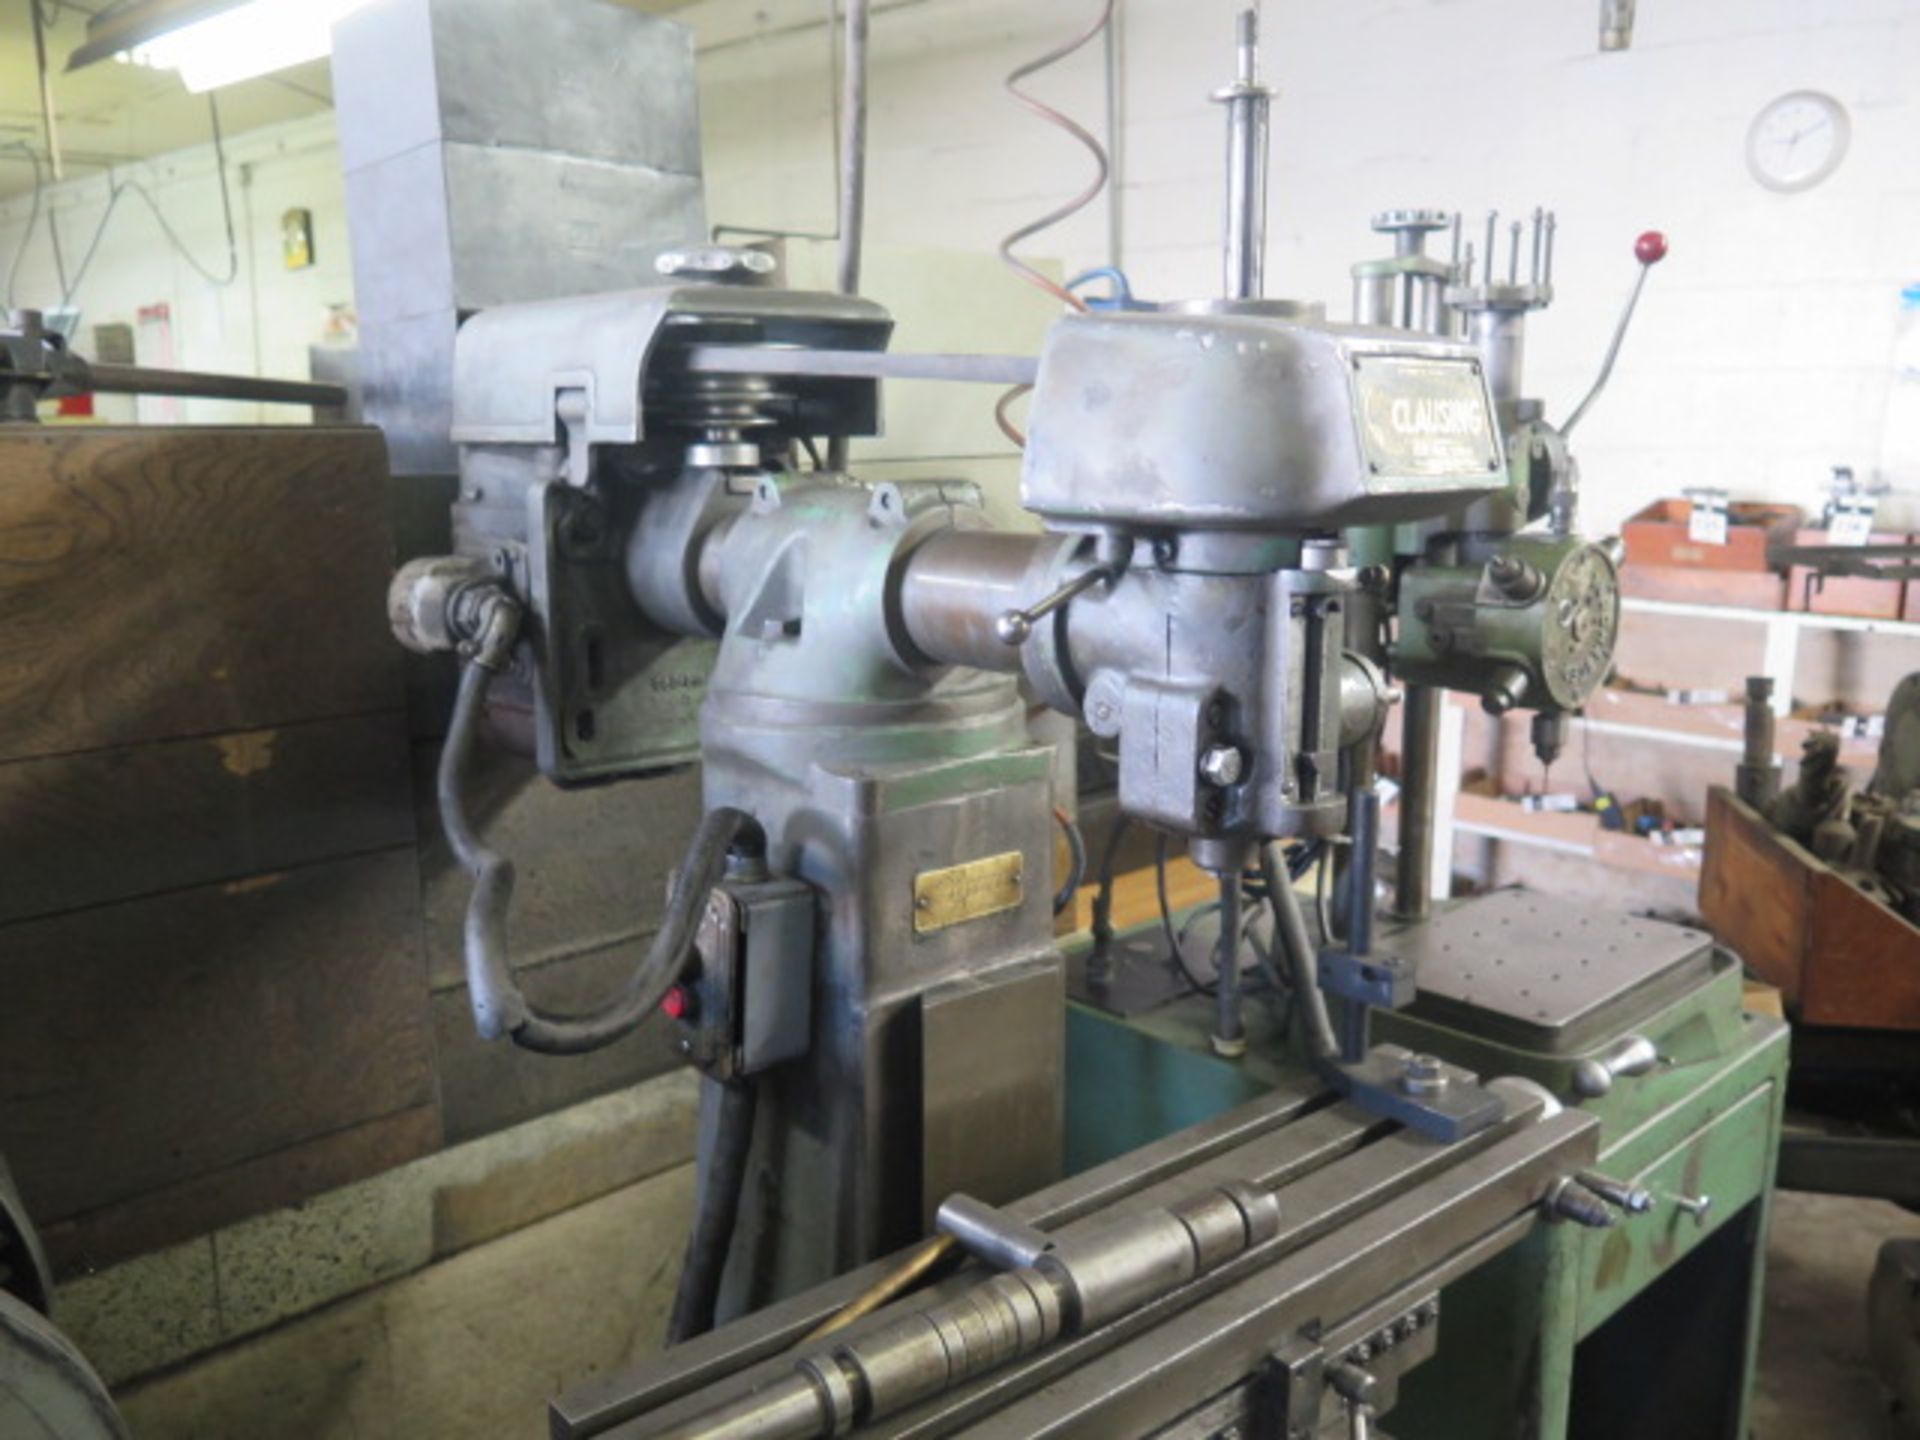 Clausing Milling / Drilling Machine s/n 8520 w/ 4-Speeds, 6” x 24” Table - Image 2 of 4